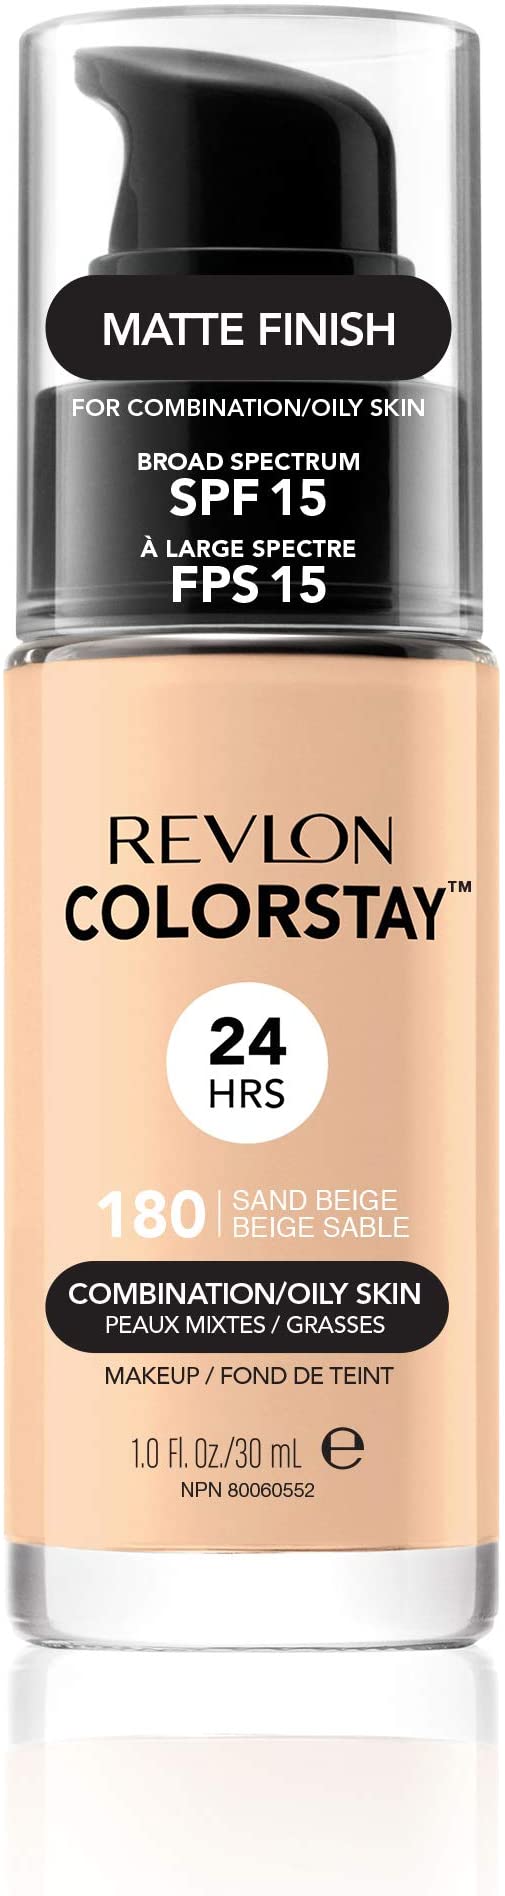 Revlon Colorstay Foundation for Combination/Oily Skin with Saliclyic Acid, SPF 15, Sand Beige